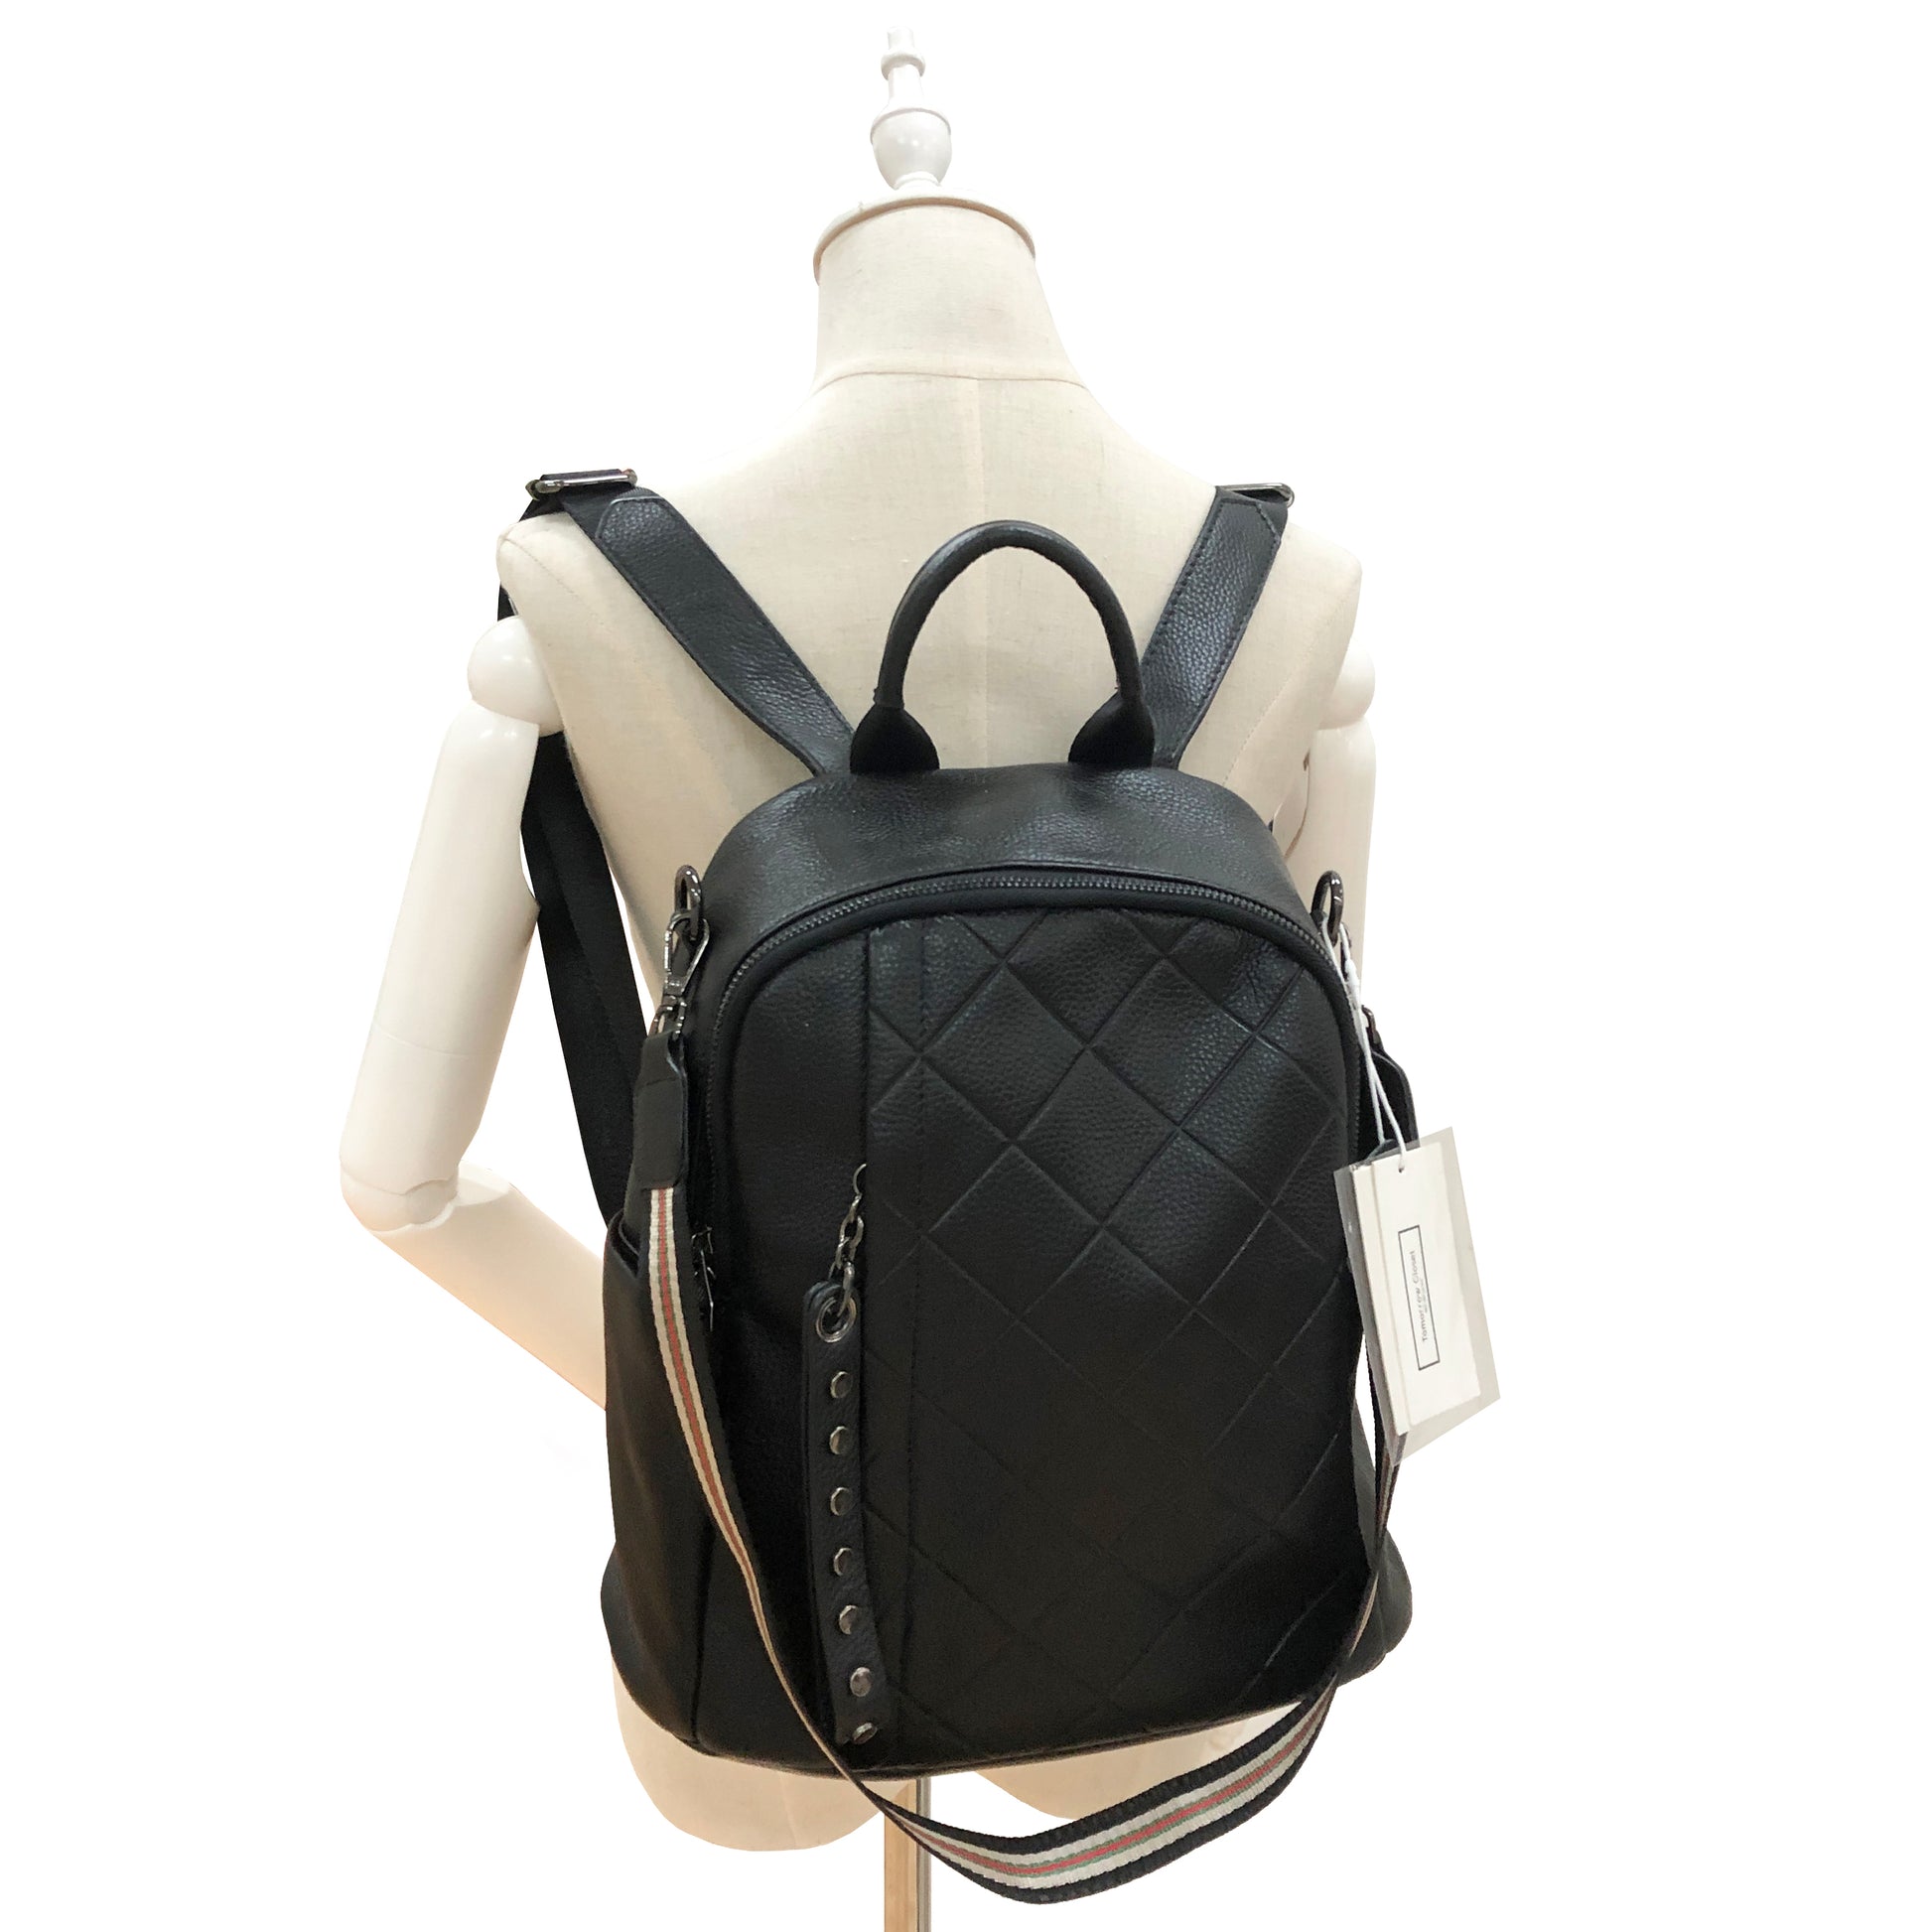 Women's and Men's unisex cowhide leather Diamond design backpack by Tomorrow Closet